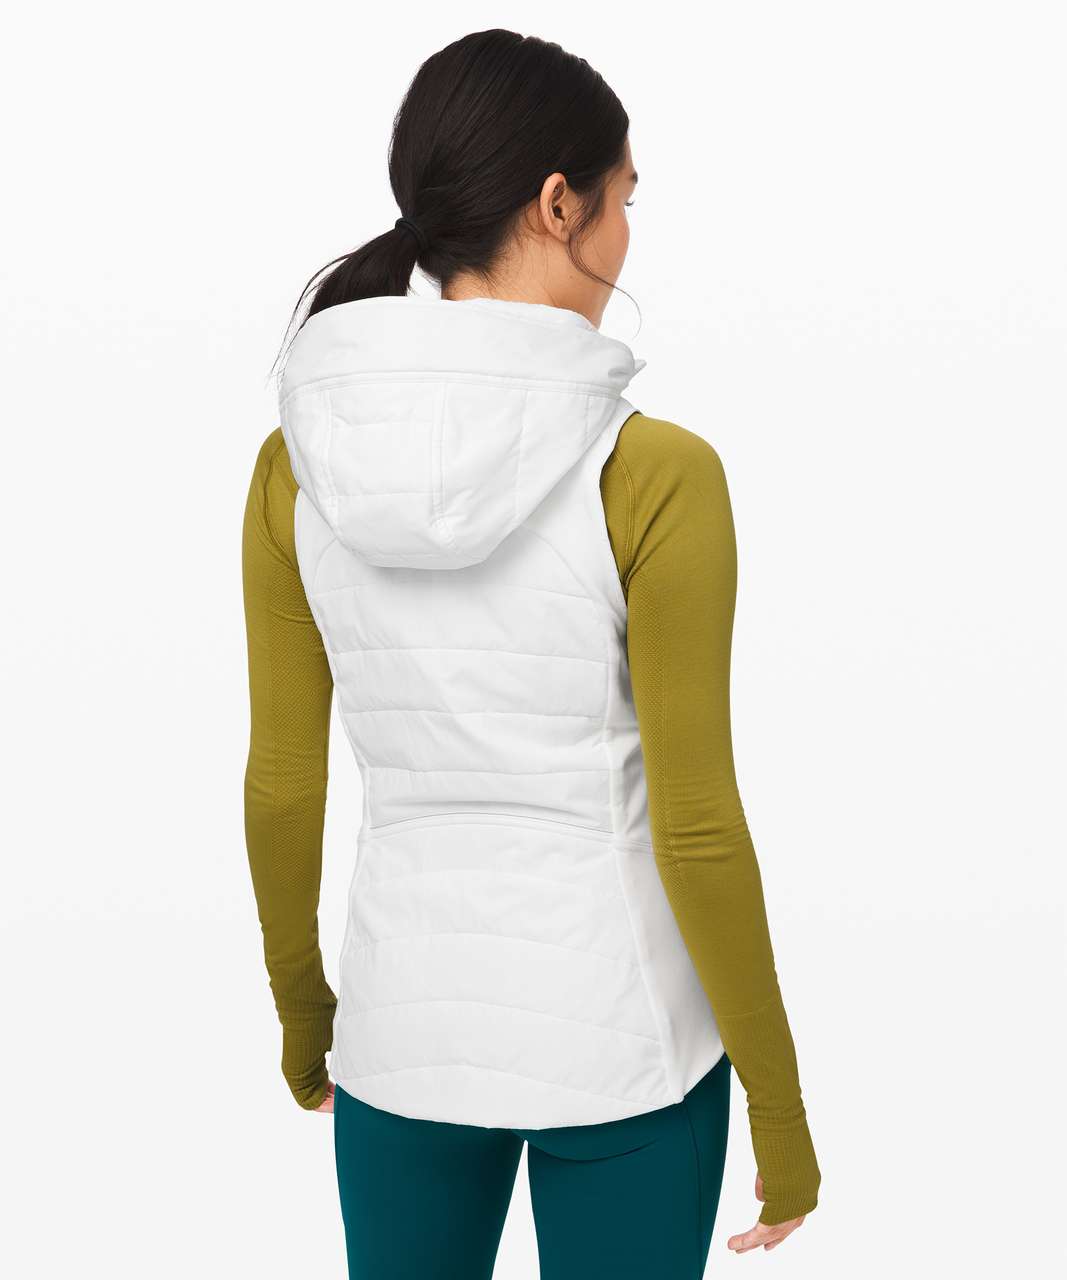 Lululemon Another Mile Vest - White (First Release)